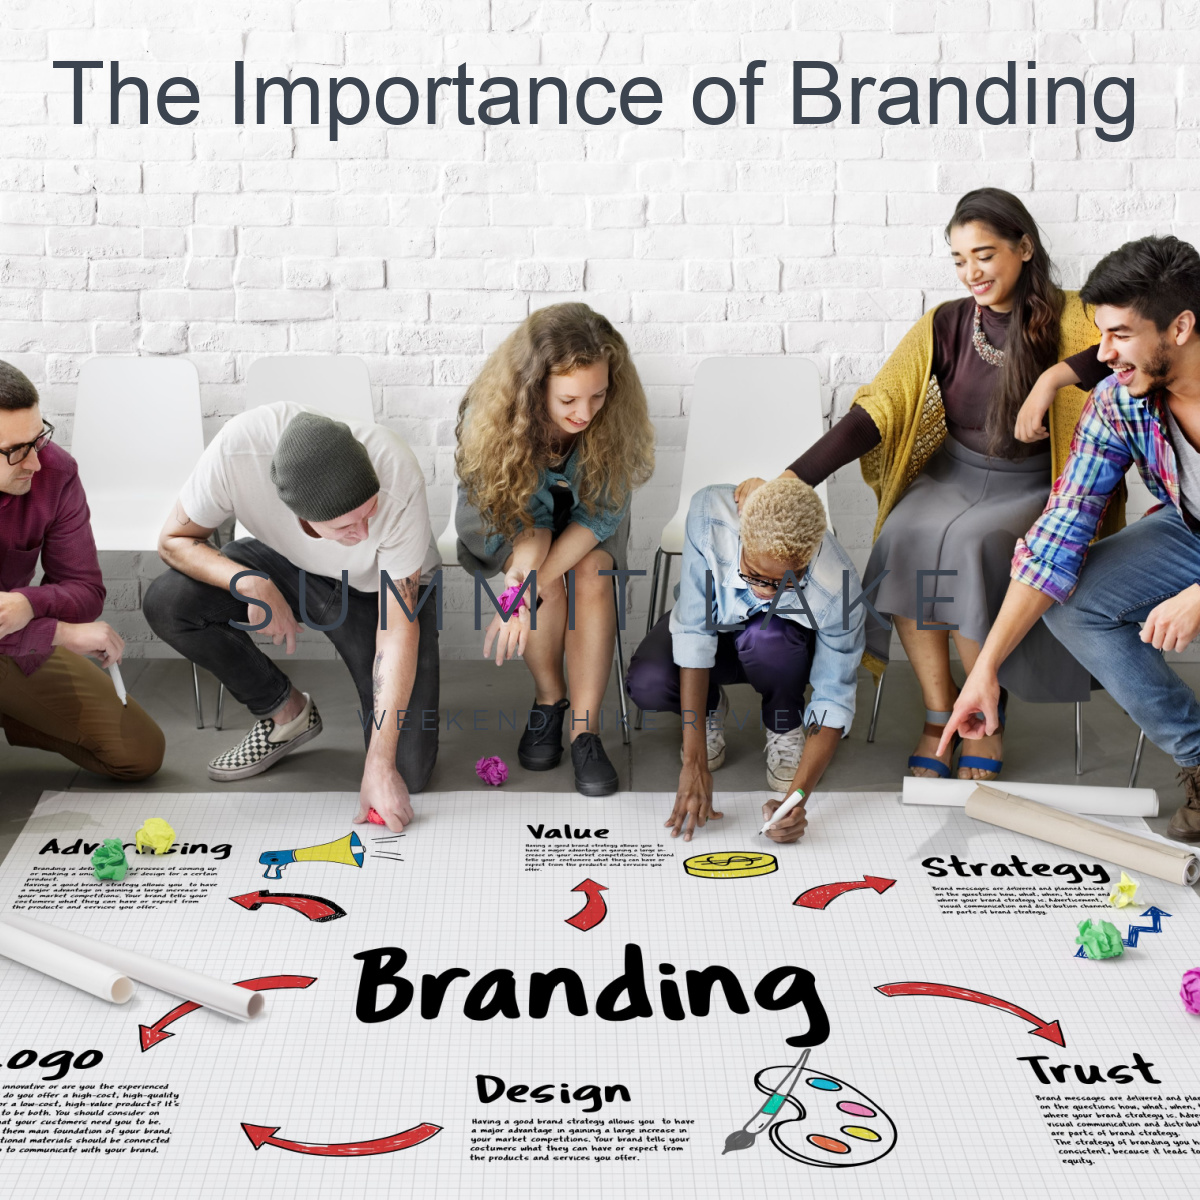 What is the importance of Branding?